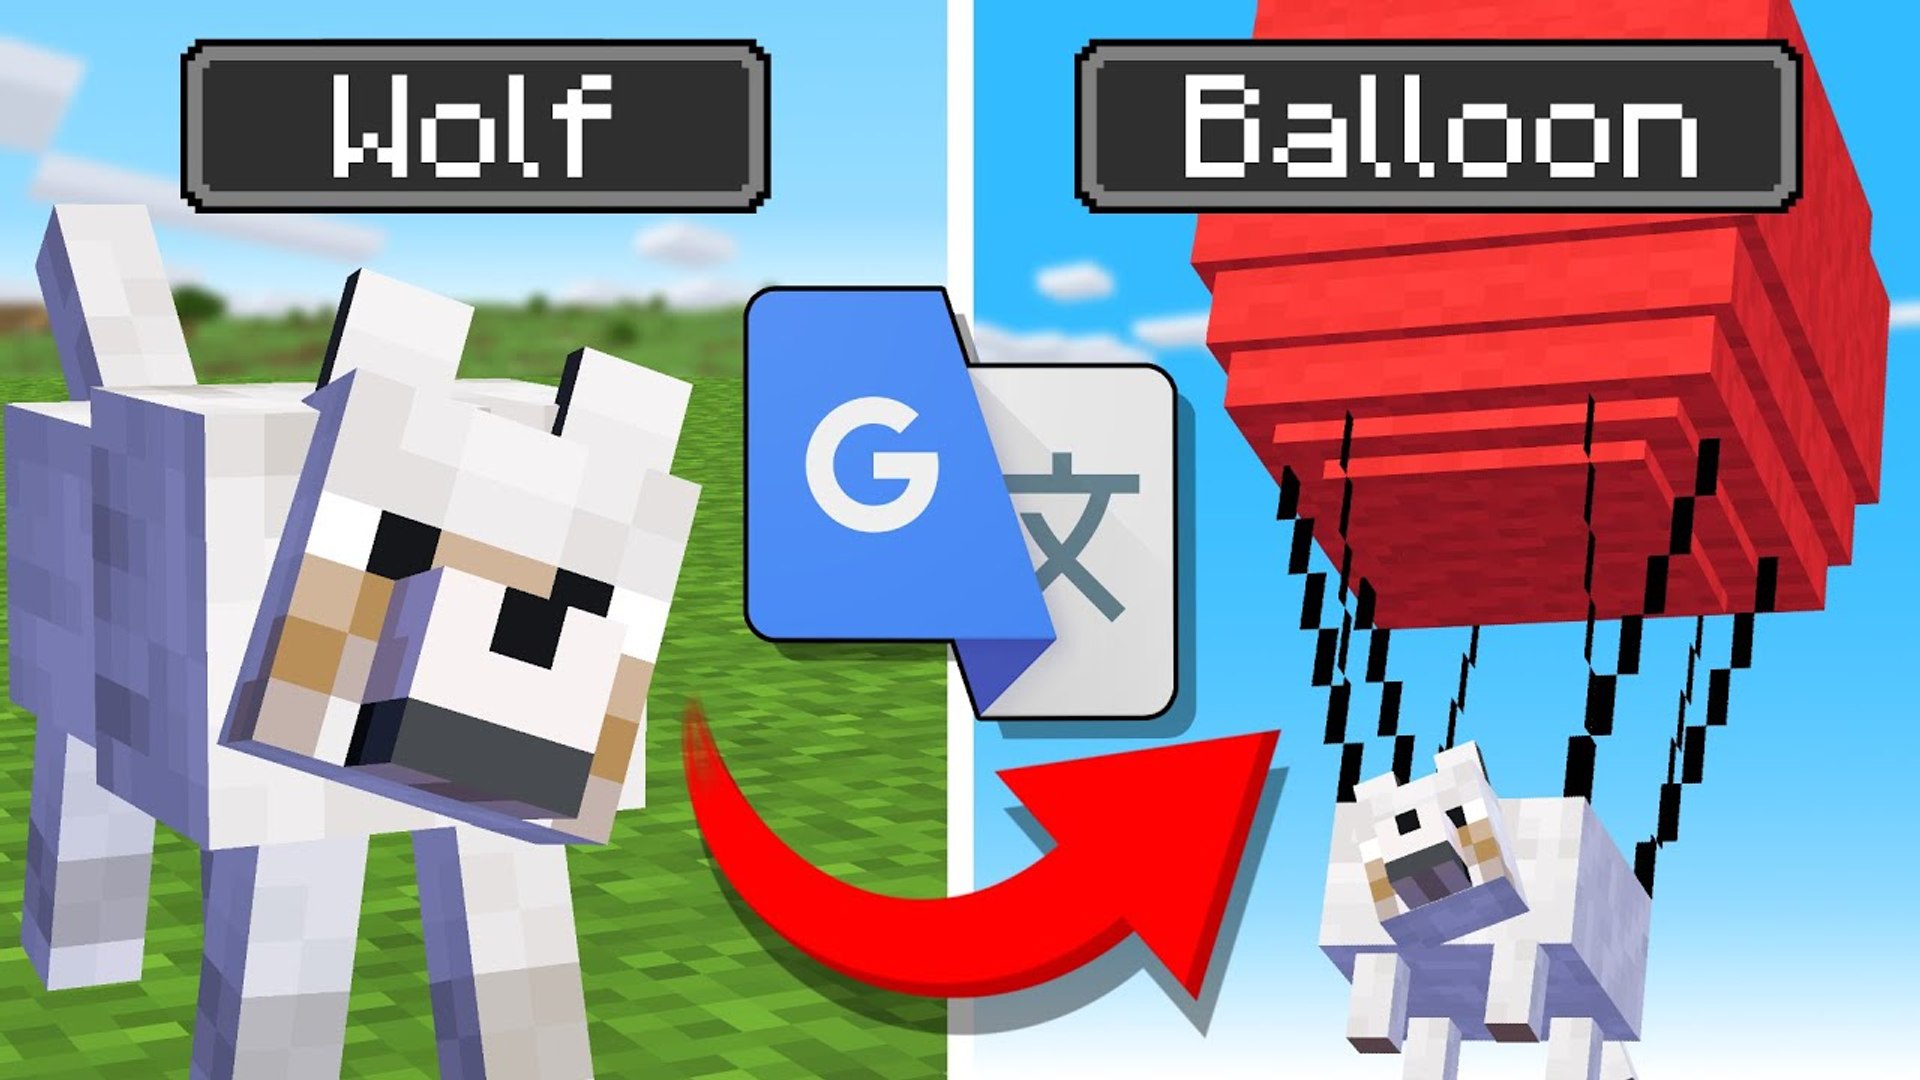 I Google Translated Minecraft Mobs - video Dailymotion